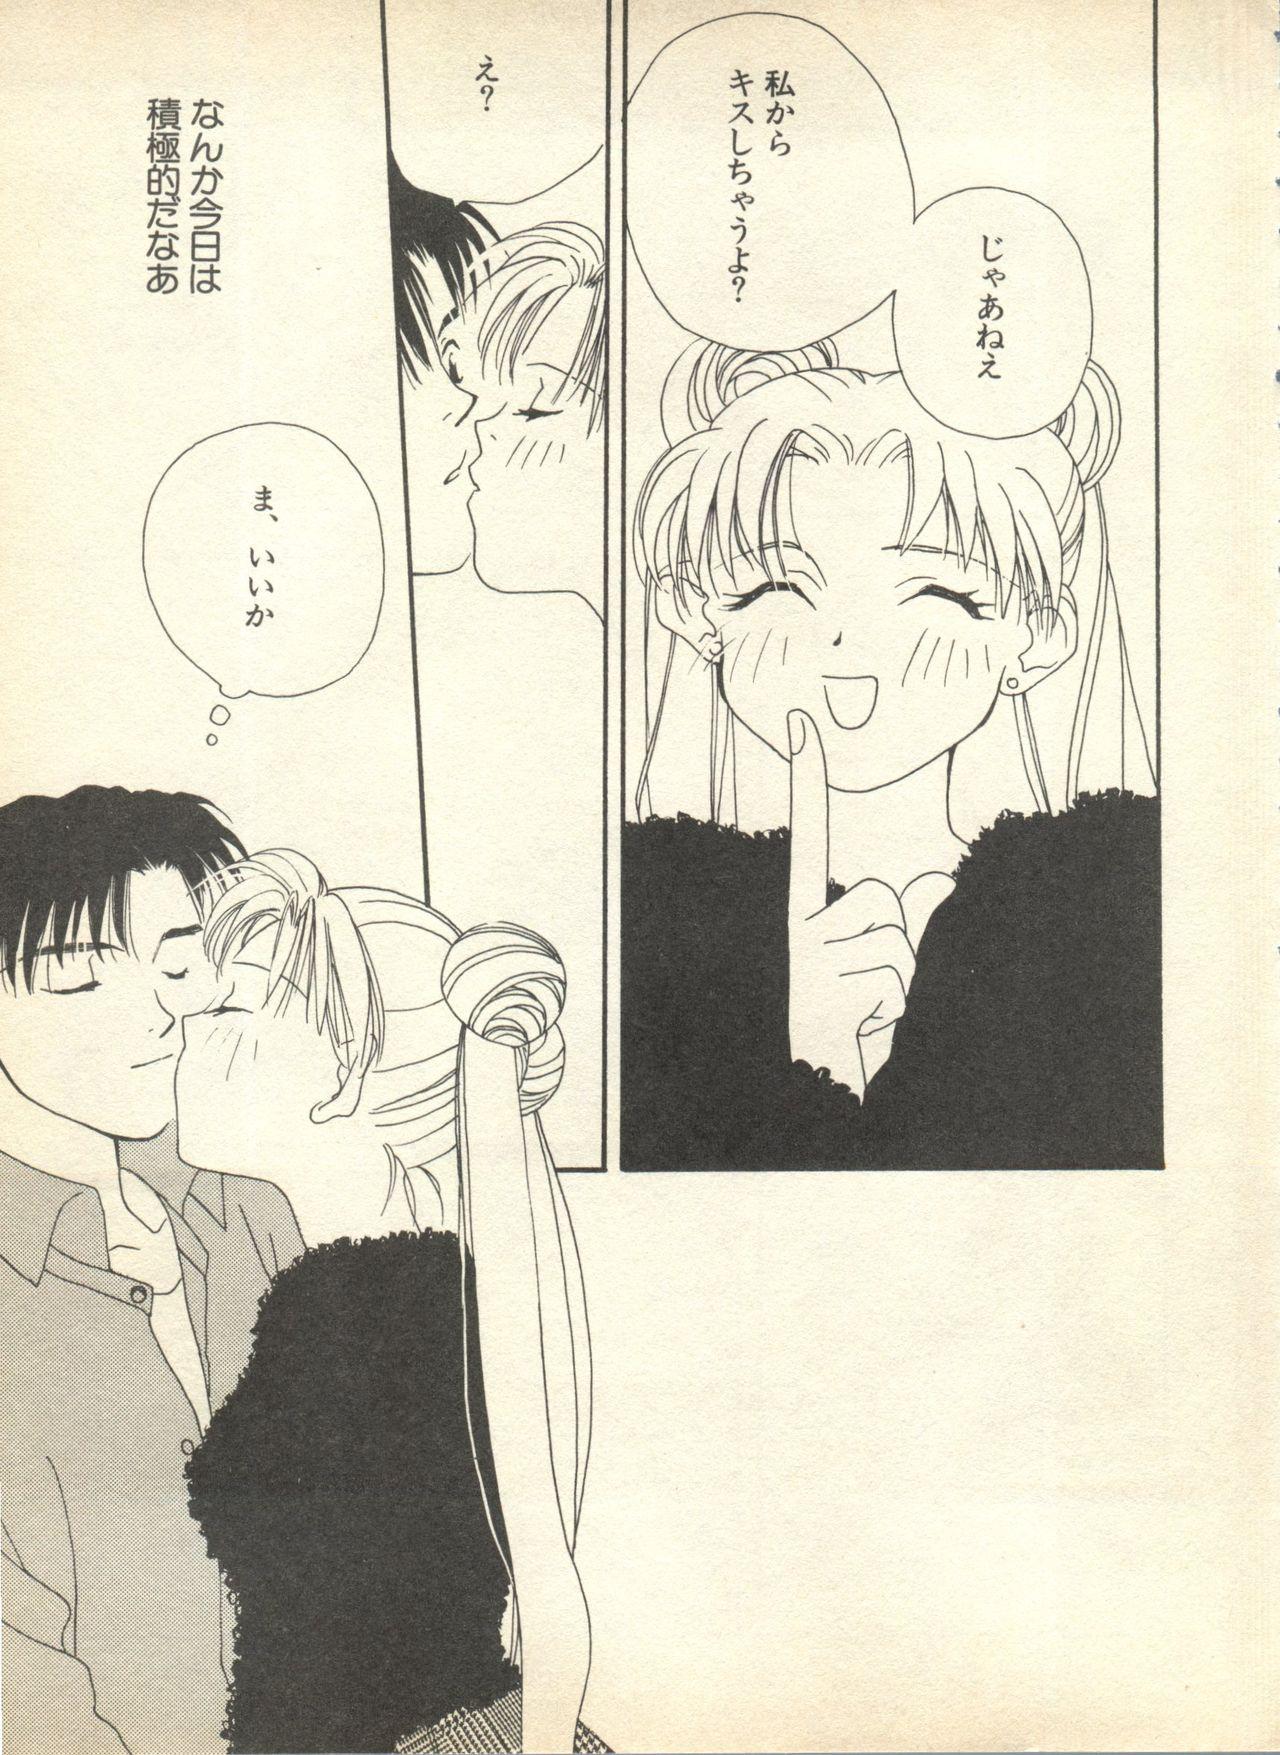 Analsex Lunatic Party 9 - Sailor moon Ass To Mouth - Page 6